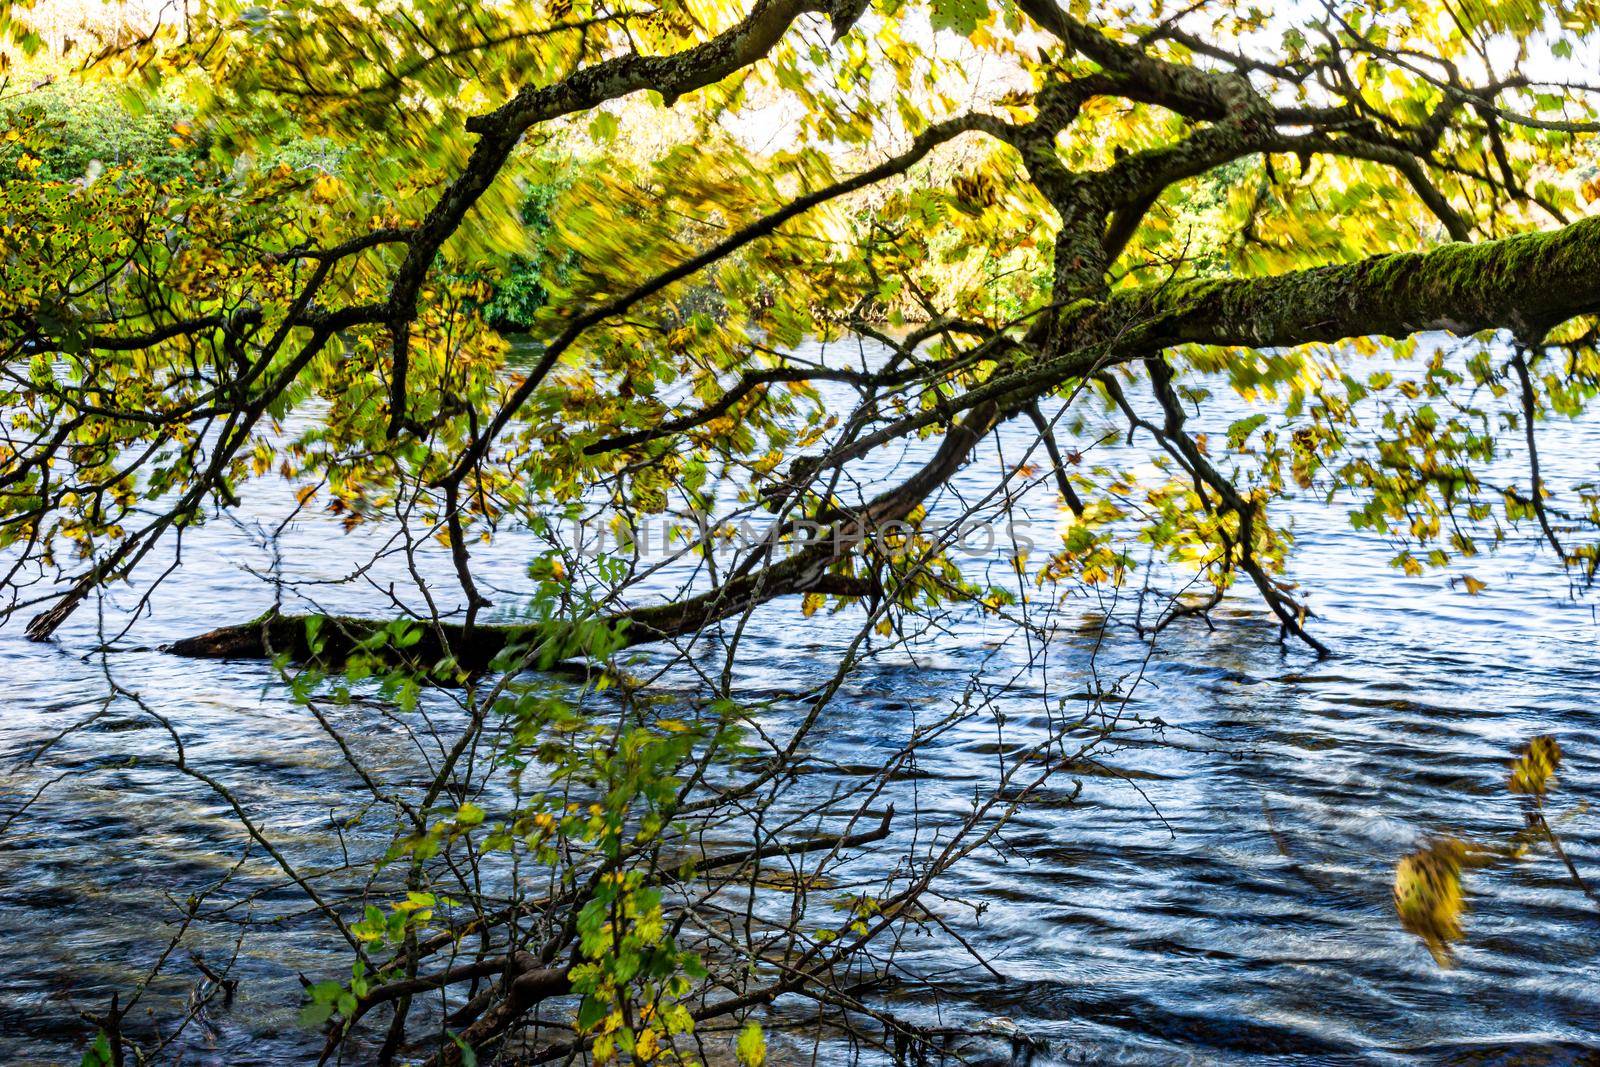 Close up image of branches from a tree near  the shore of a lake, hanging over the water.